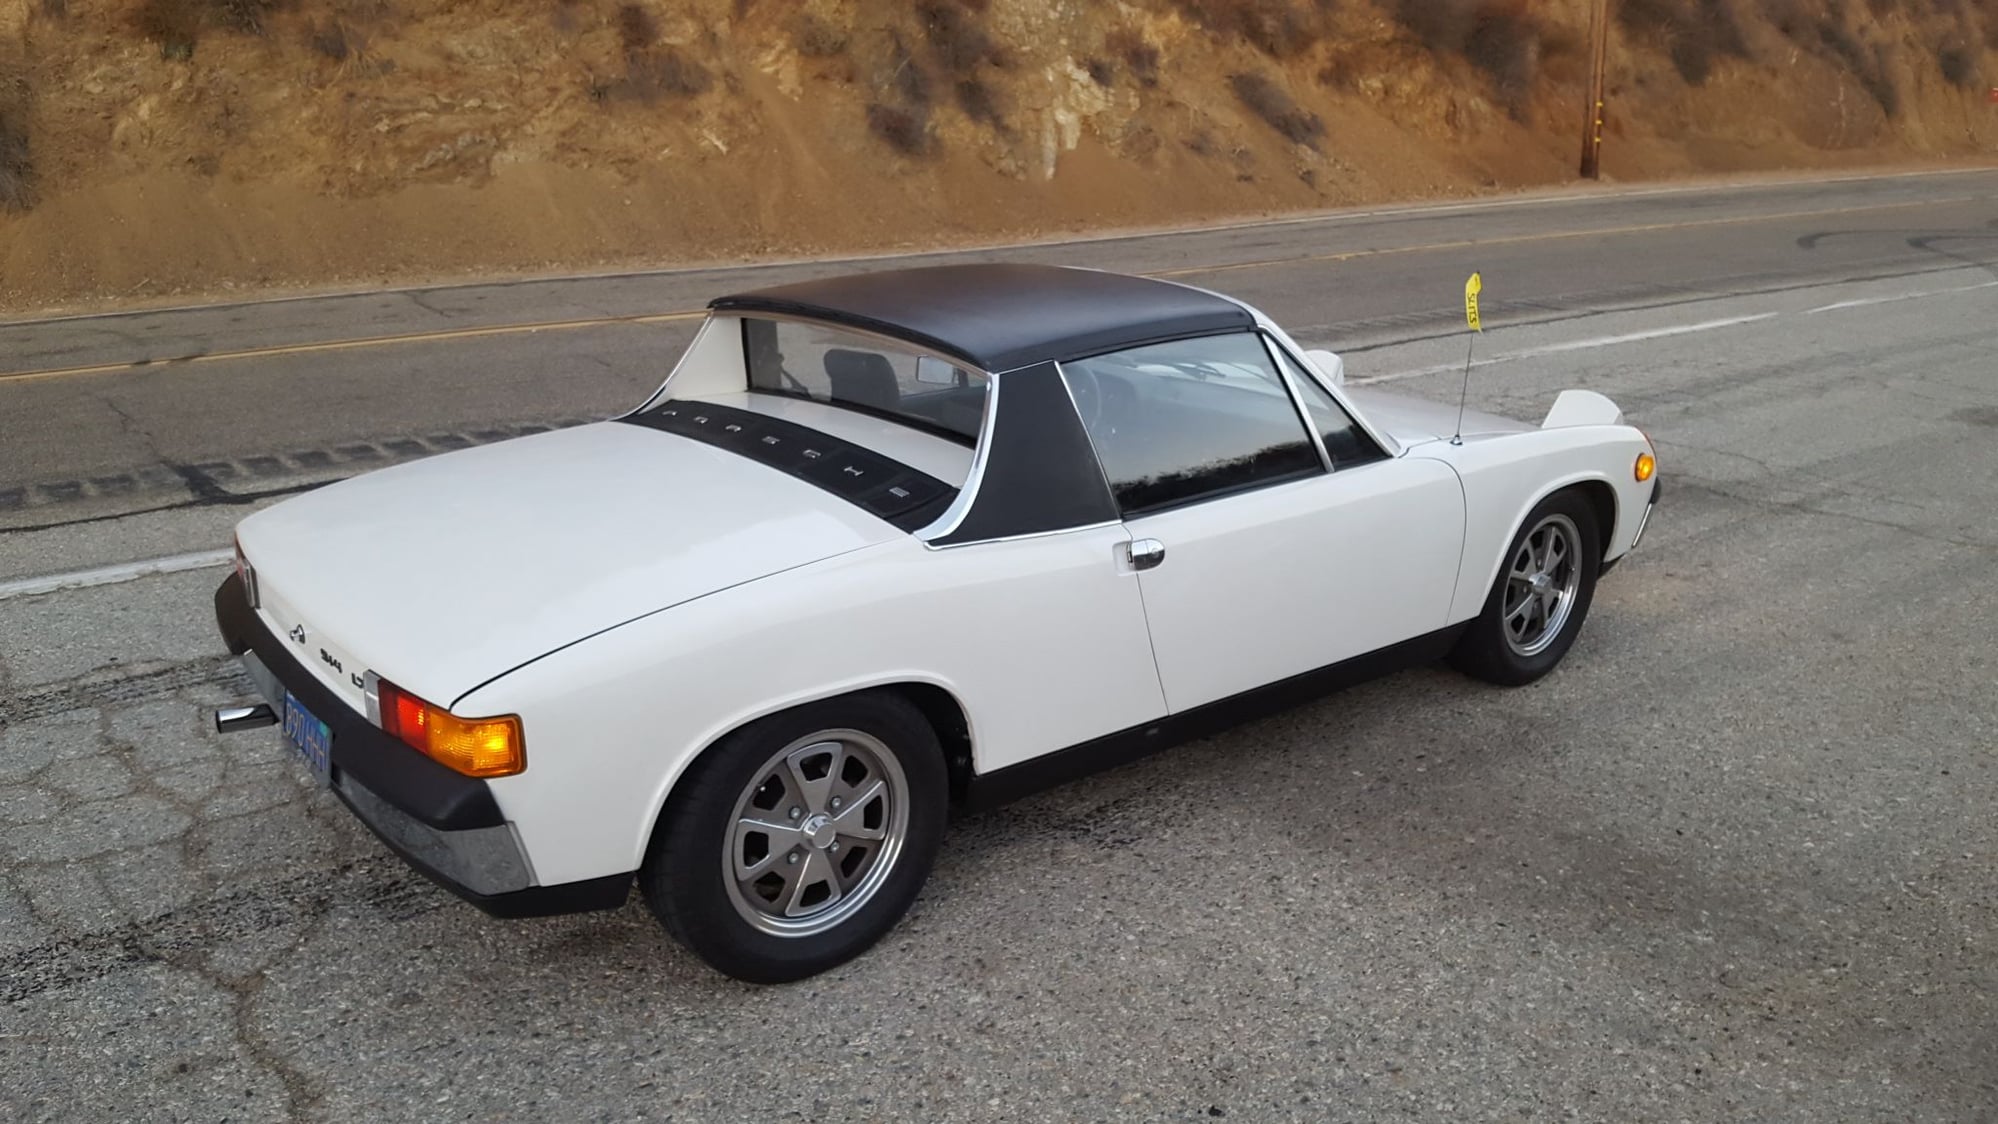 1973 Porsche 914 - 1973 Appearance Group Ivory White 914-4 - Used - VIN 47329111370000000 - 10,900 Miles - 4 cyl - 2WD - Manual - Convertible - White - San Gabriel Valley, CA 91740, United States